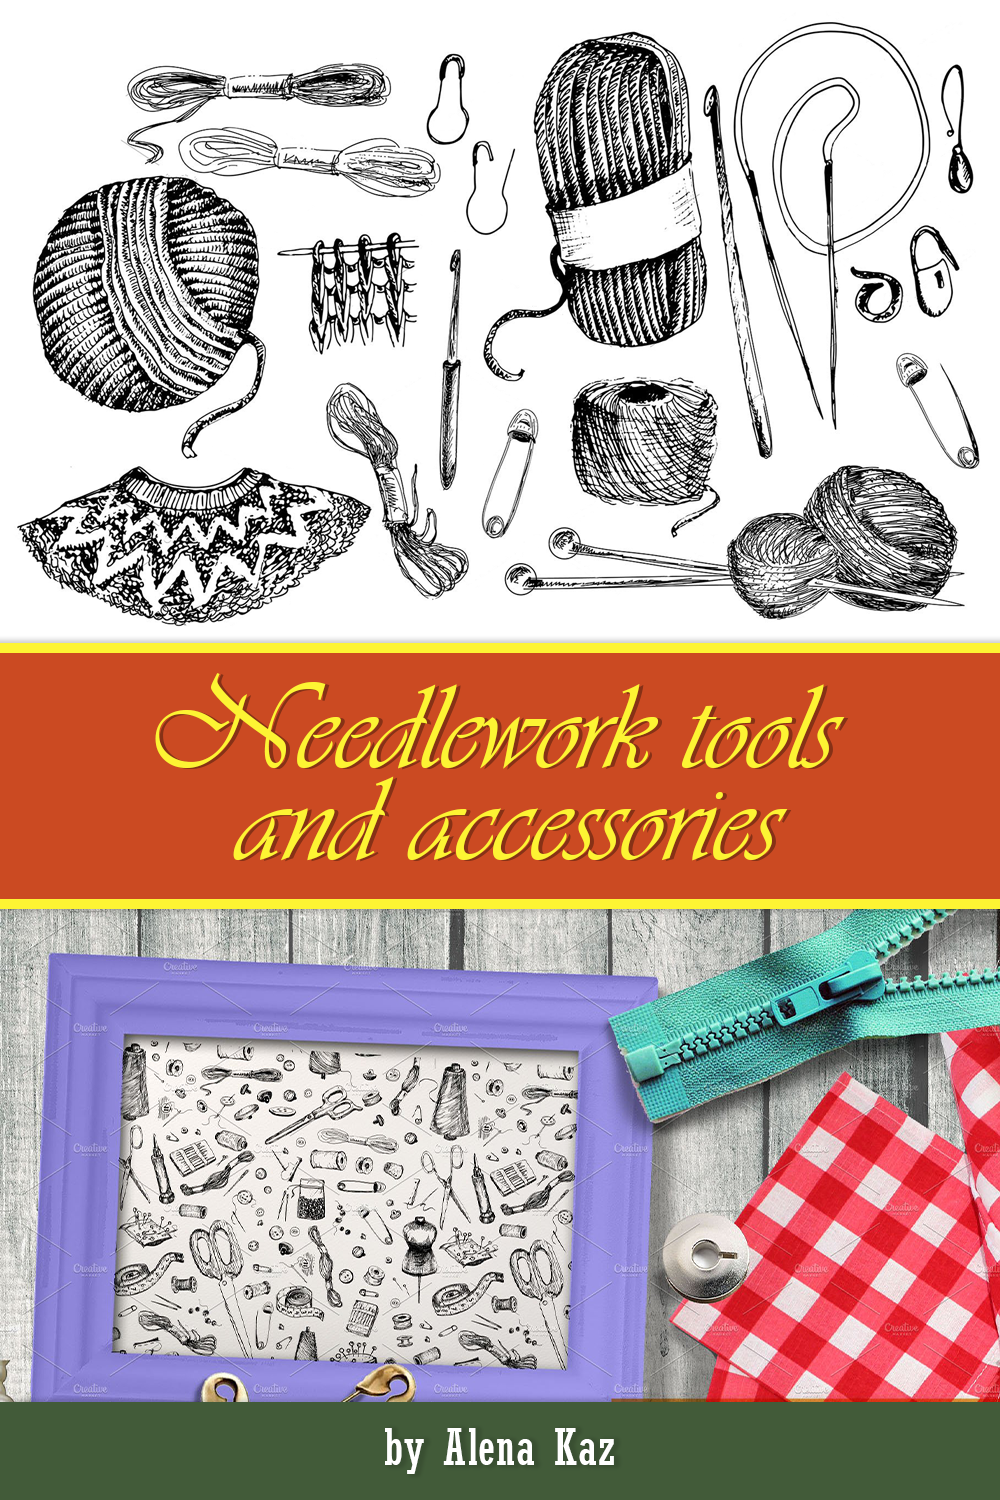 Needlework tools and accessories of pinterest.